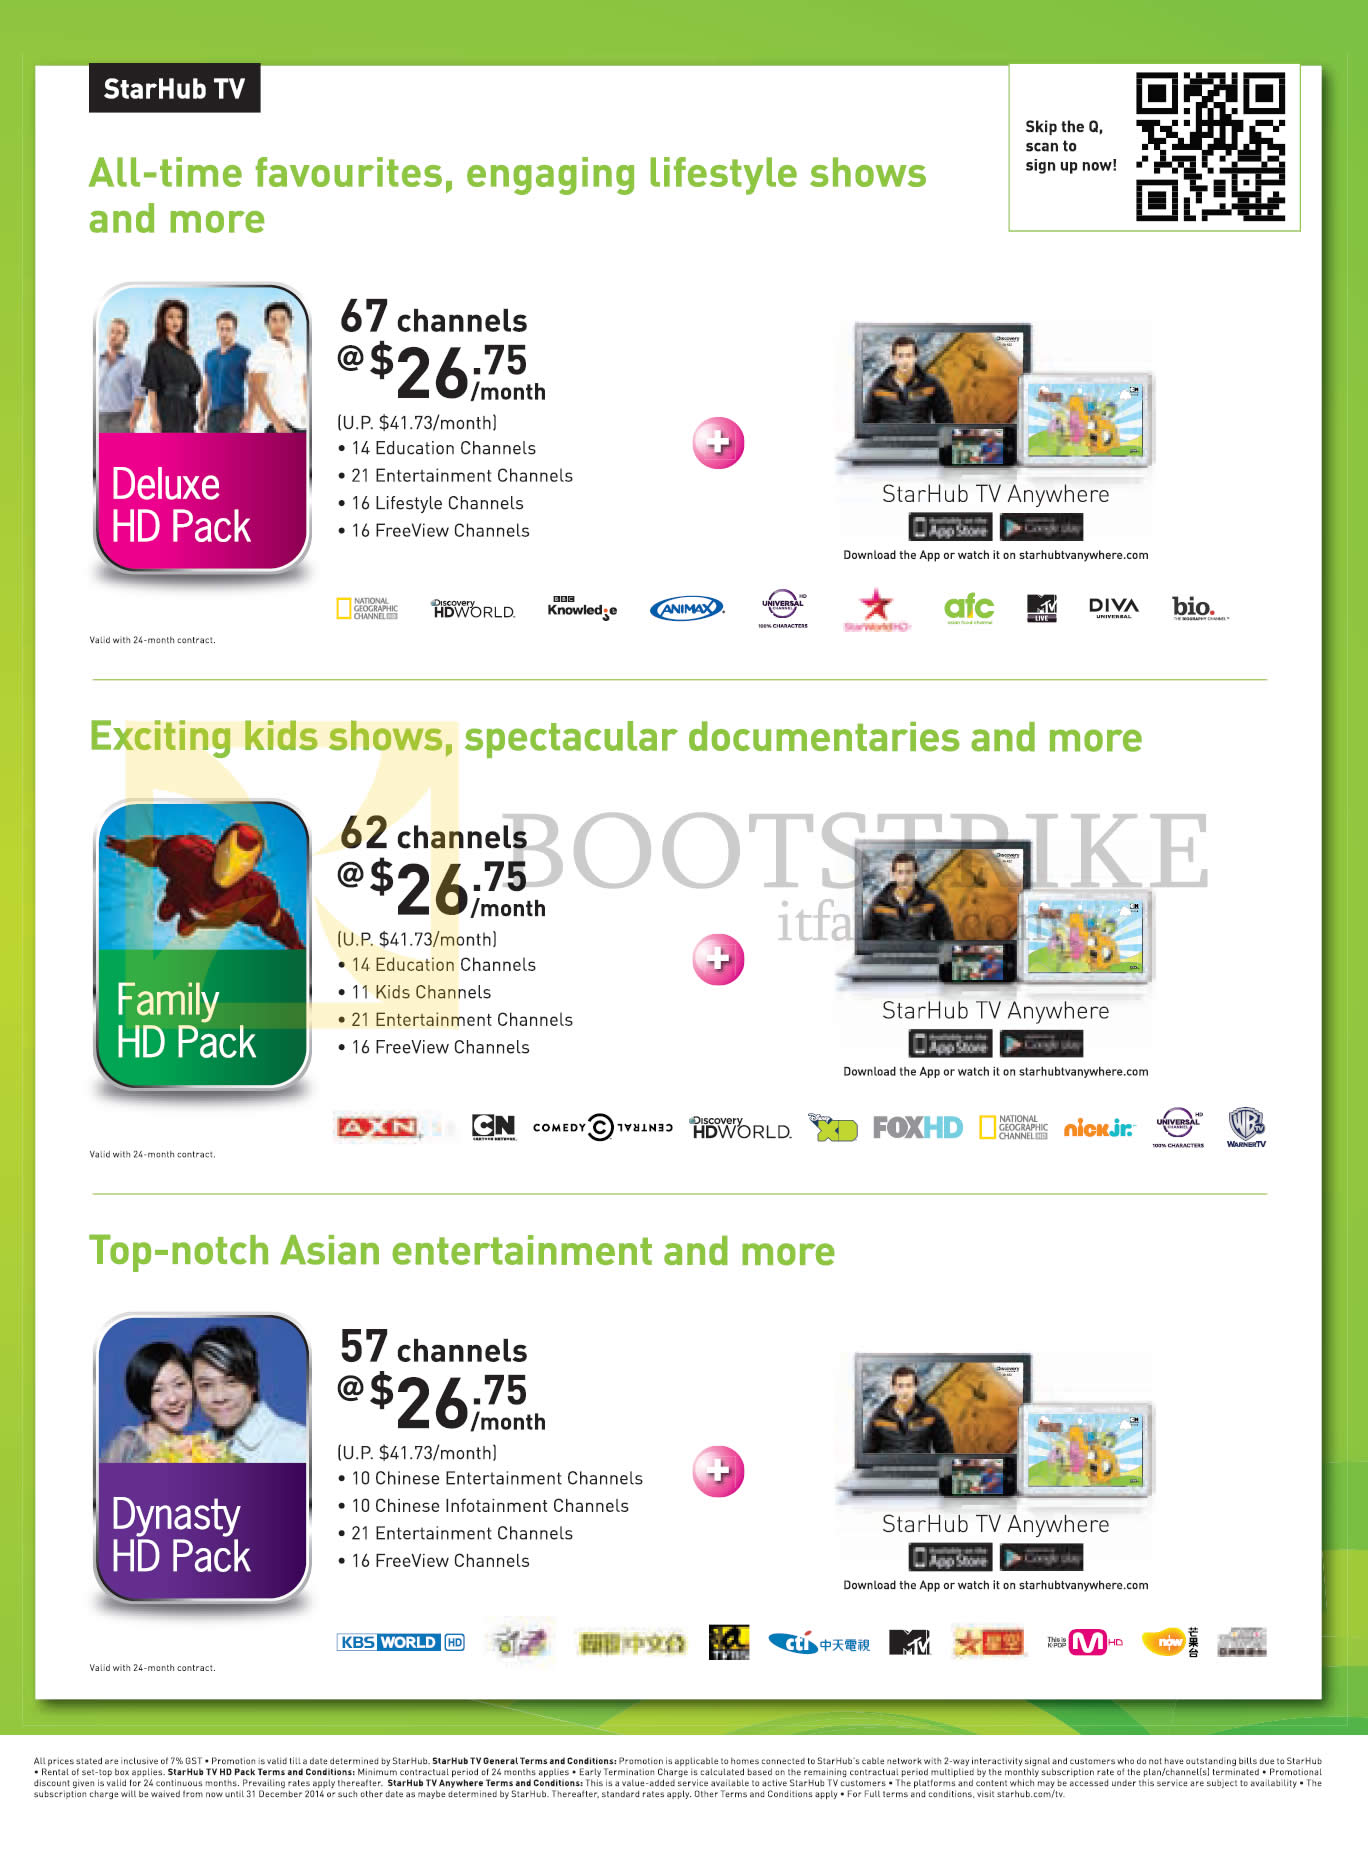 PC SHOW 2014 price list image brochure of Starhub Cable TV Deluxe HD Pack, Family, Dynasty